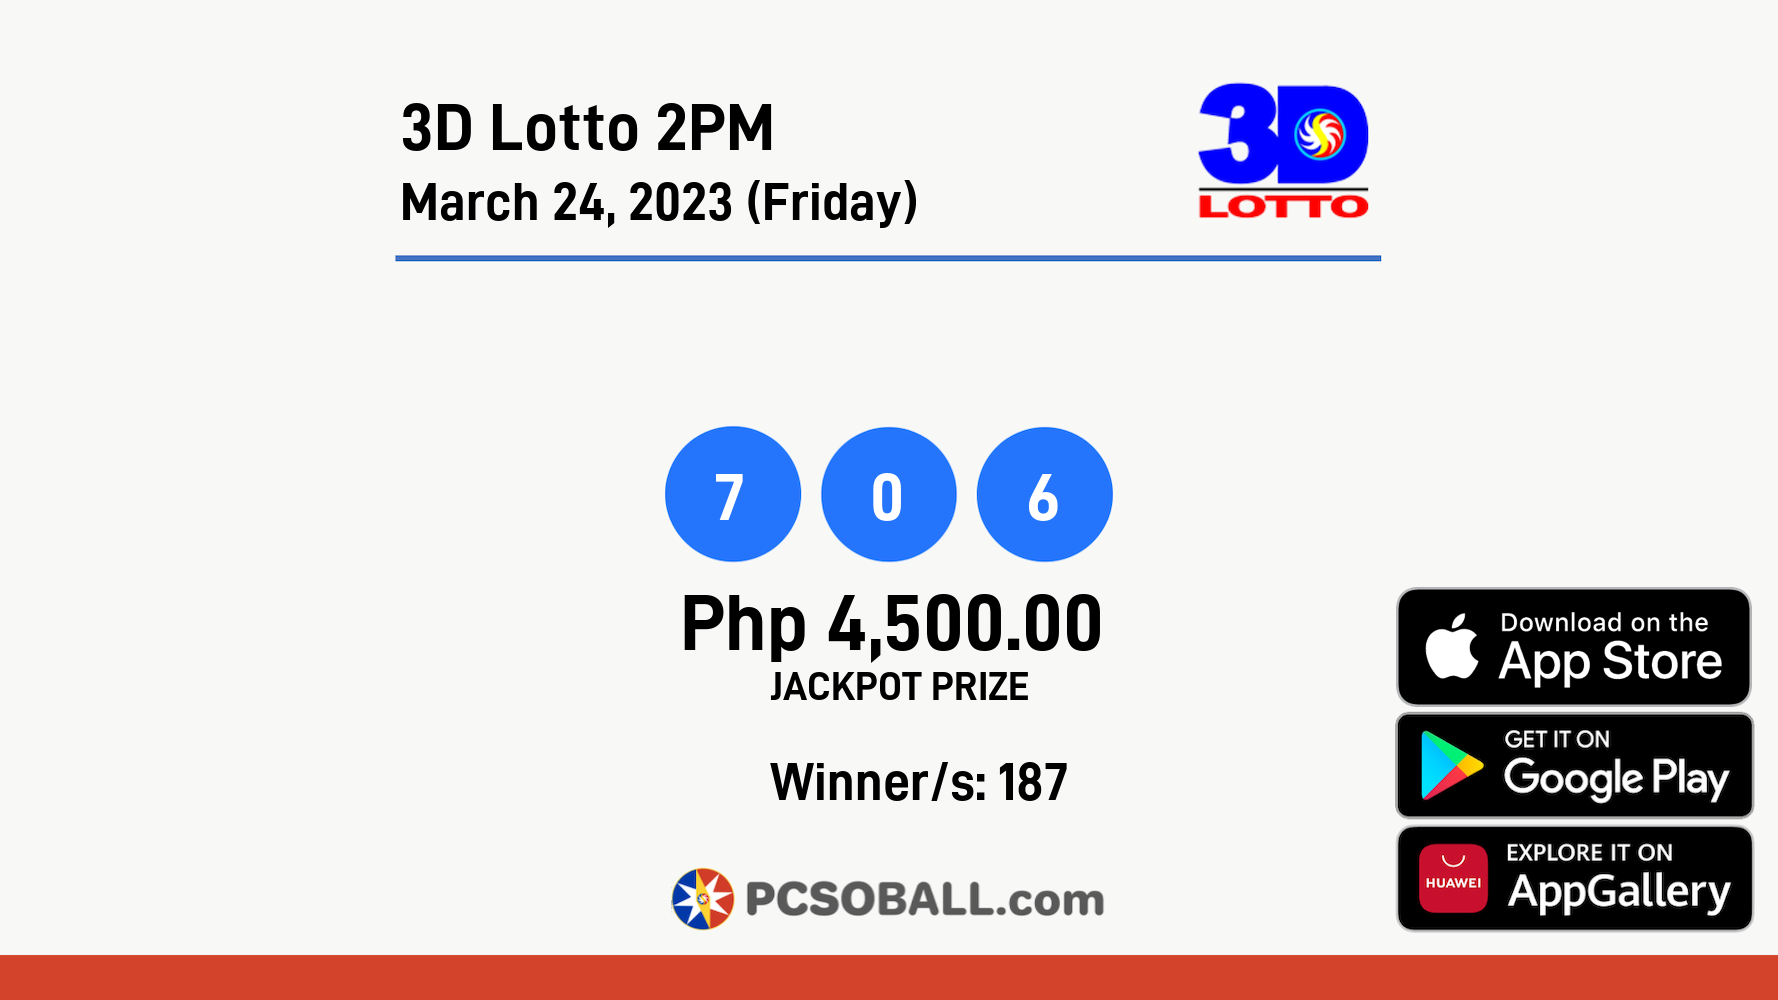 3D Lotto 2PM March 24, 2023 (Friday) Result